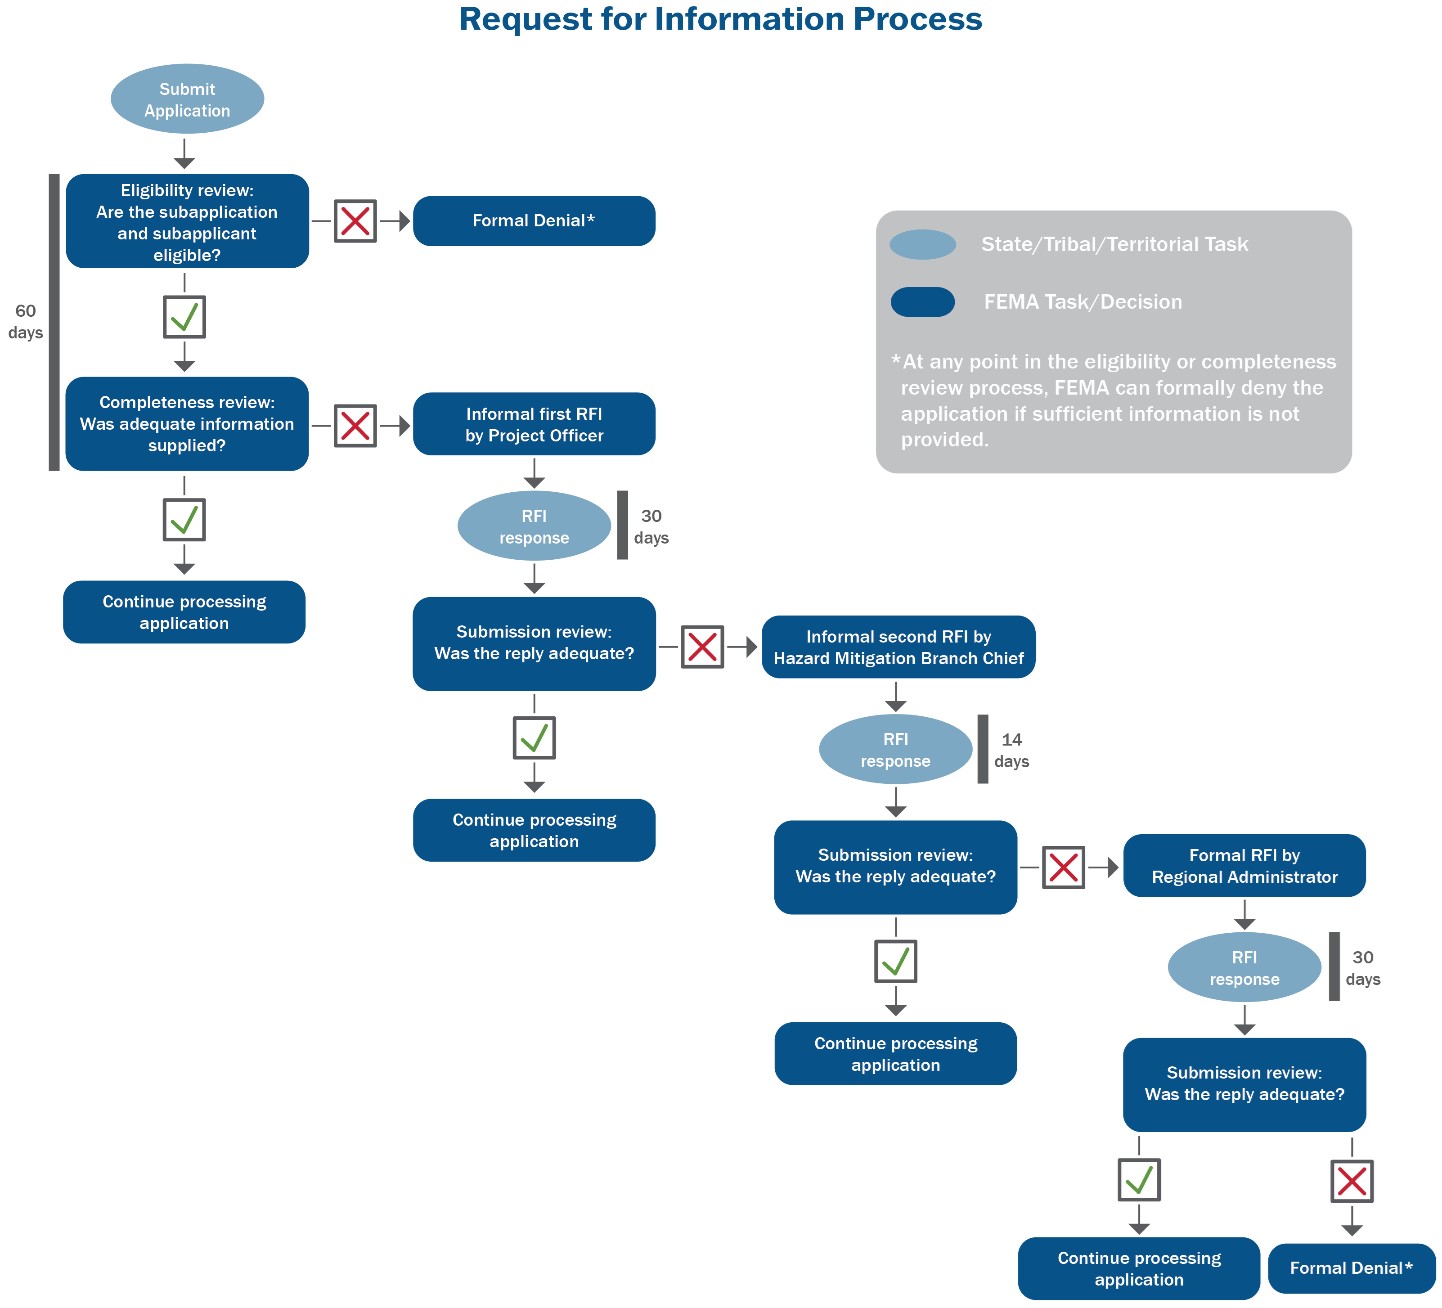 A flowchart which outlines the request for information process, including the state, tribal, or territorial tasks, and FEMA's corresponding task or decision. The chart indicates that if the reply received was not adequate, it is first escalated to the FEMA hazard mitigation branch chief and then to the FEMA regional administrator.